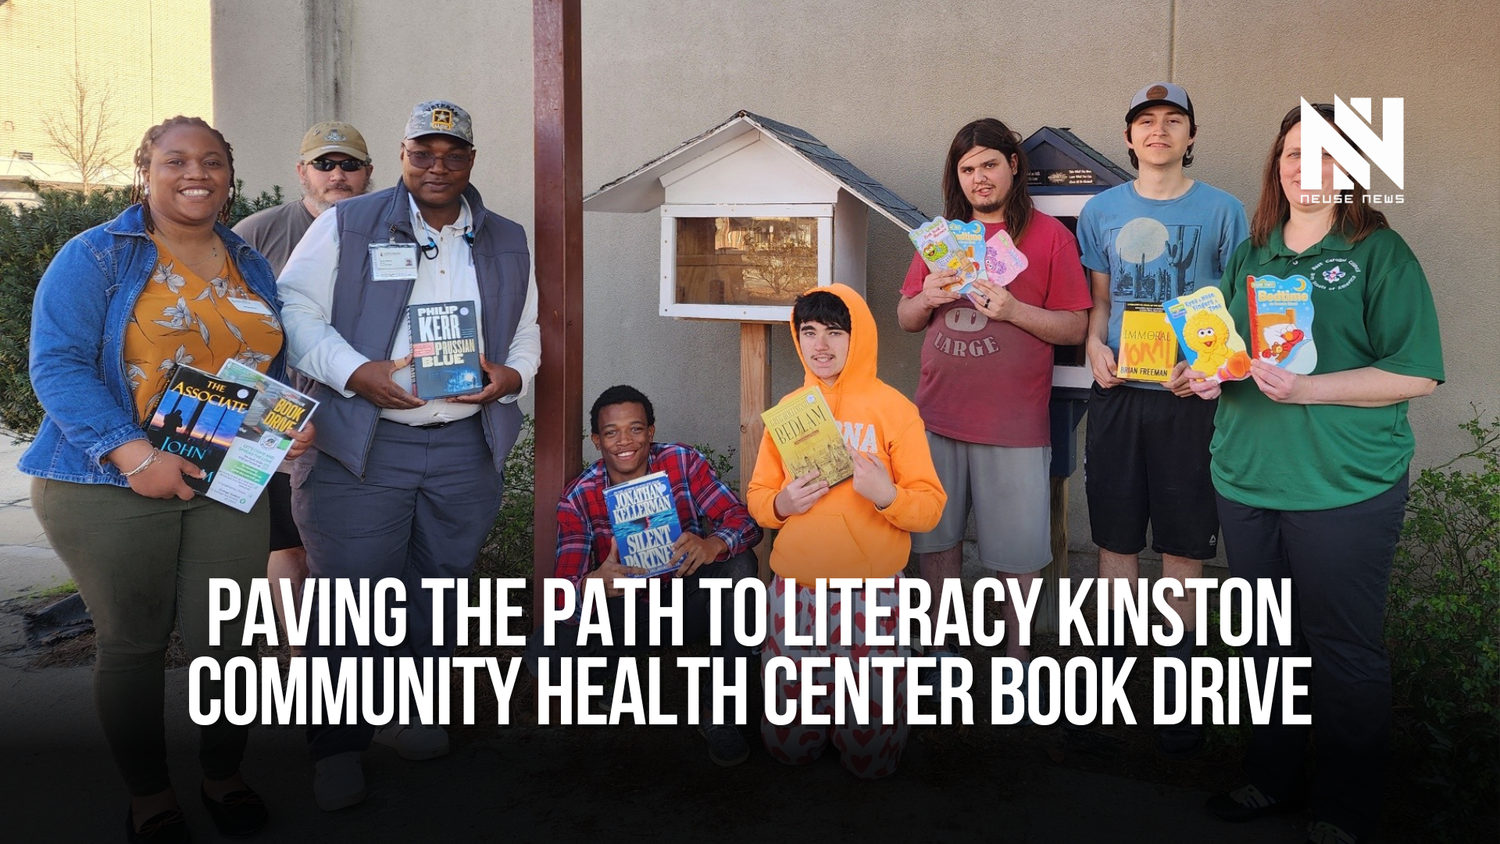 Kinston Community Health Center Book Drive Leads the Way to Literacy